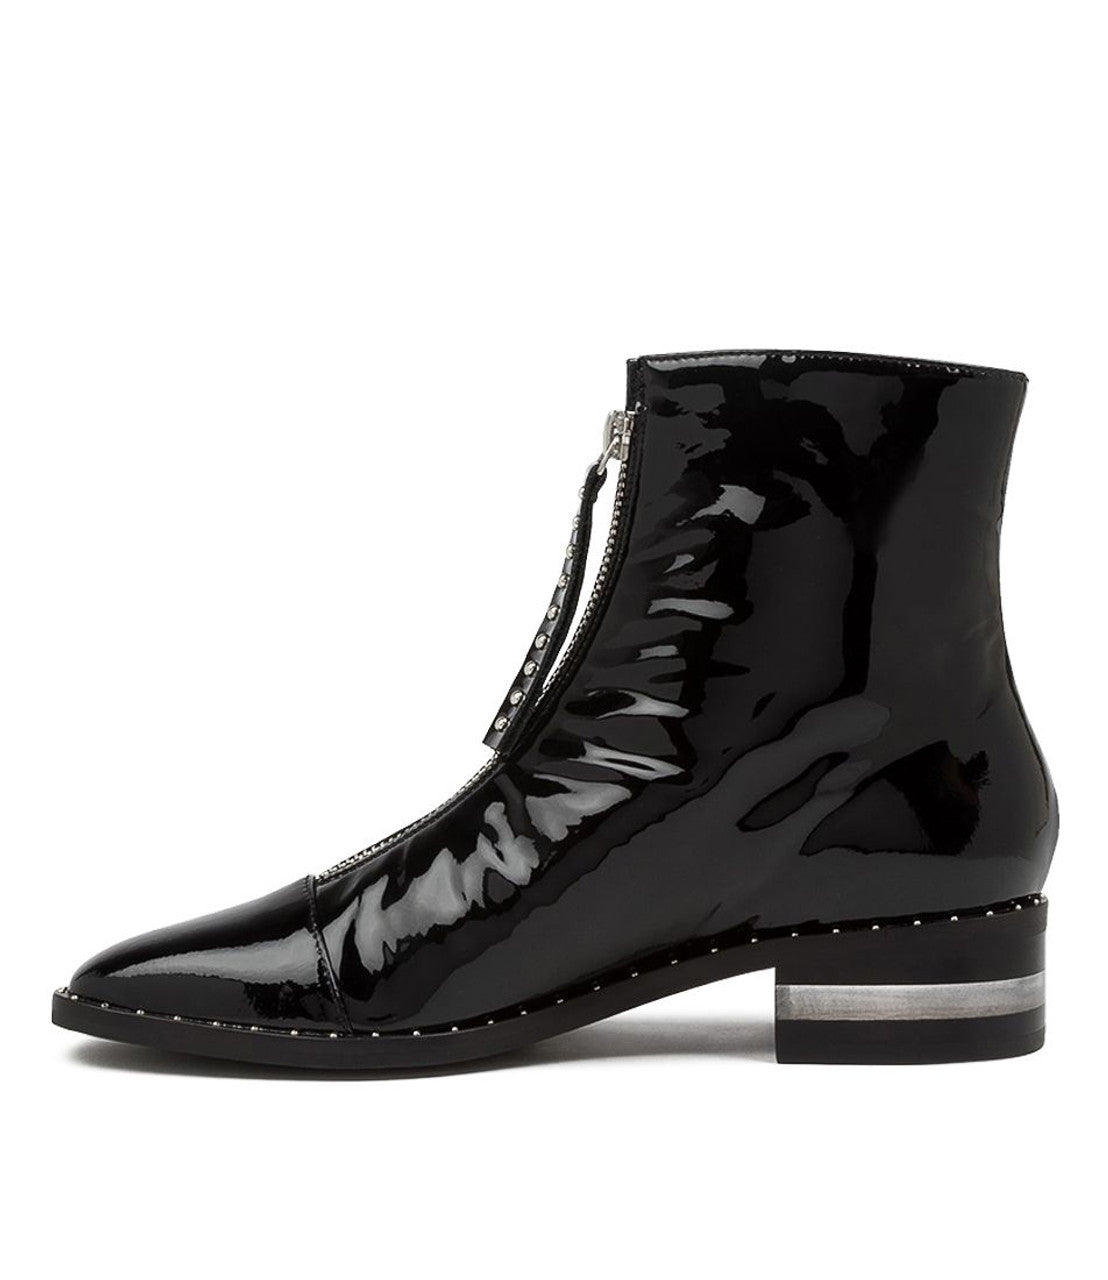 Fridays Black Patent Leather Ankle Boots Black Heel